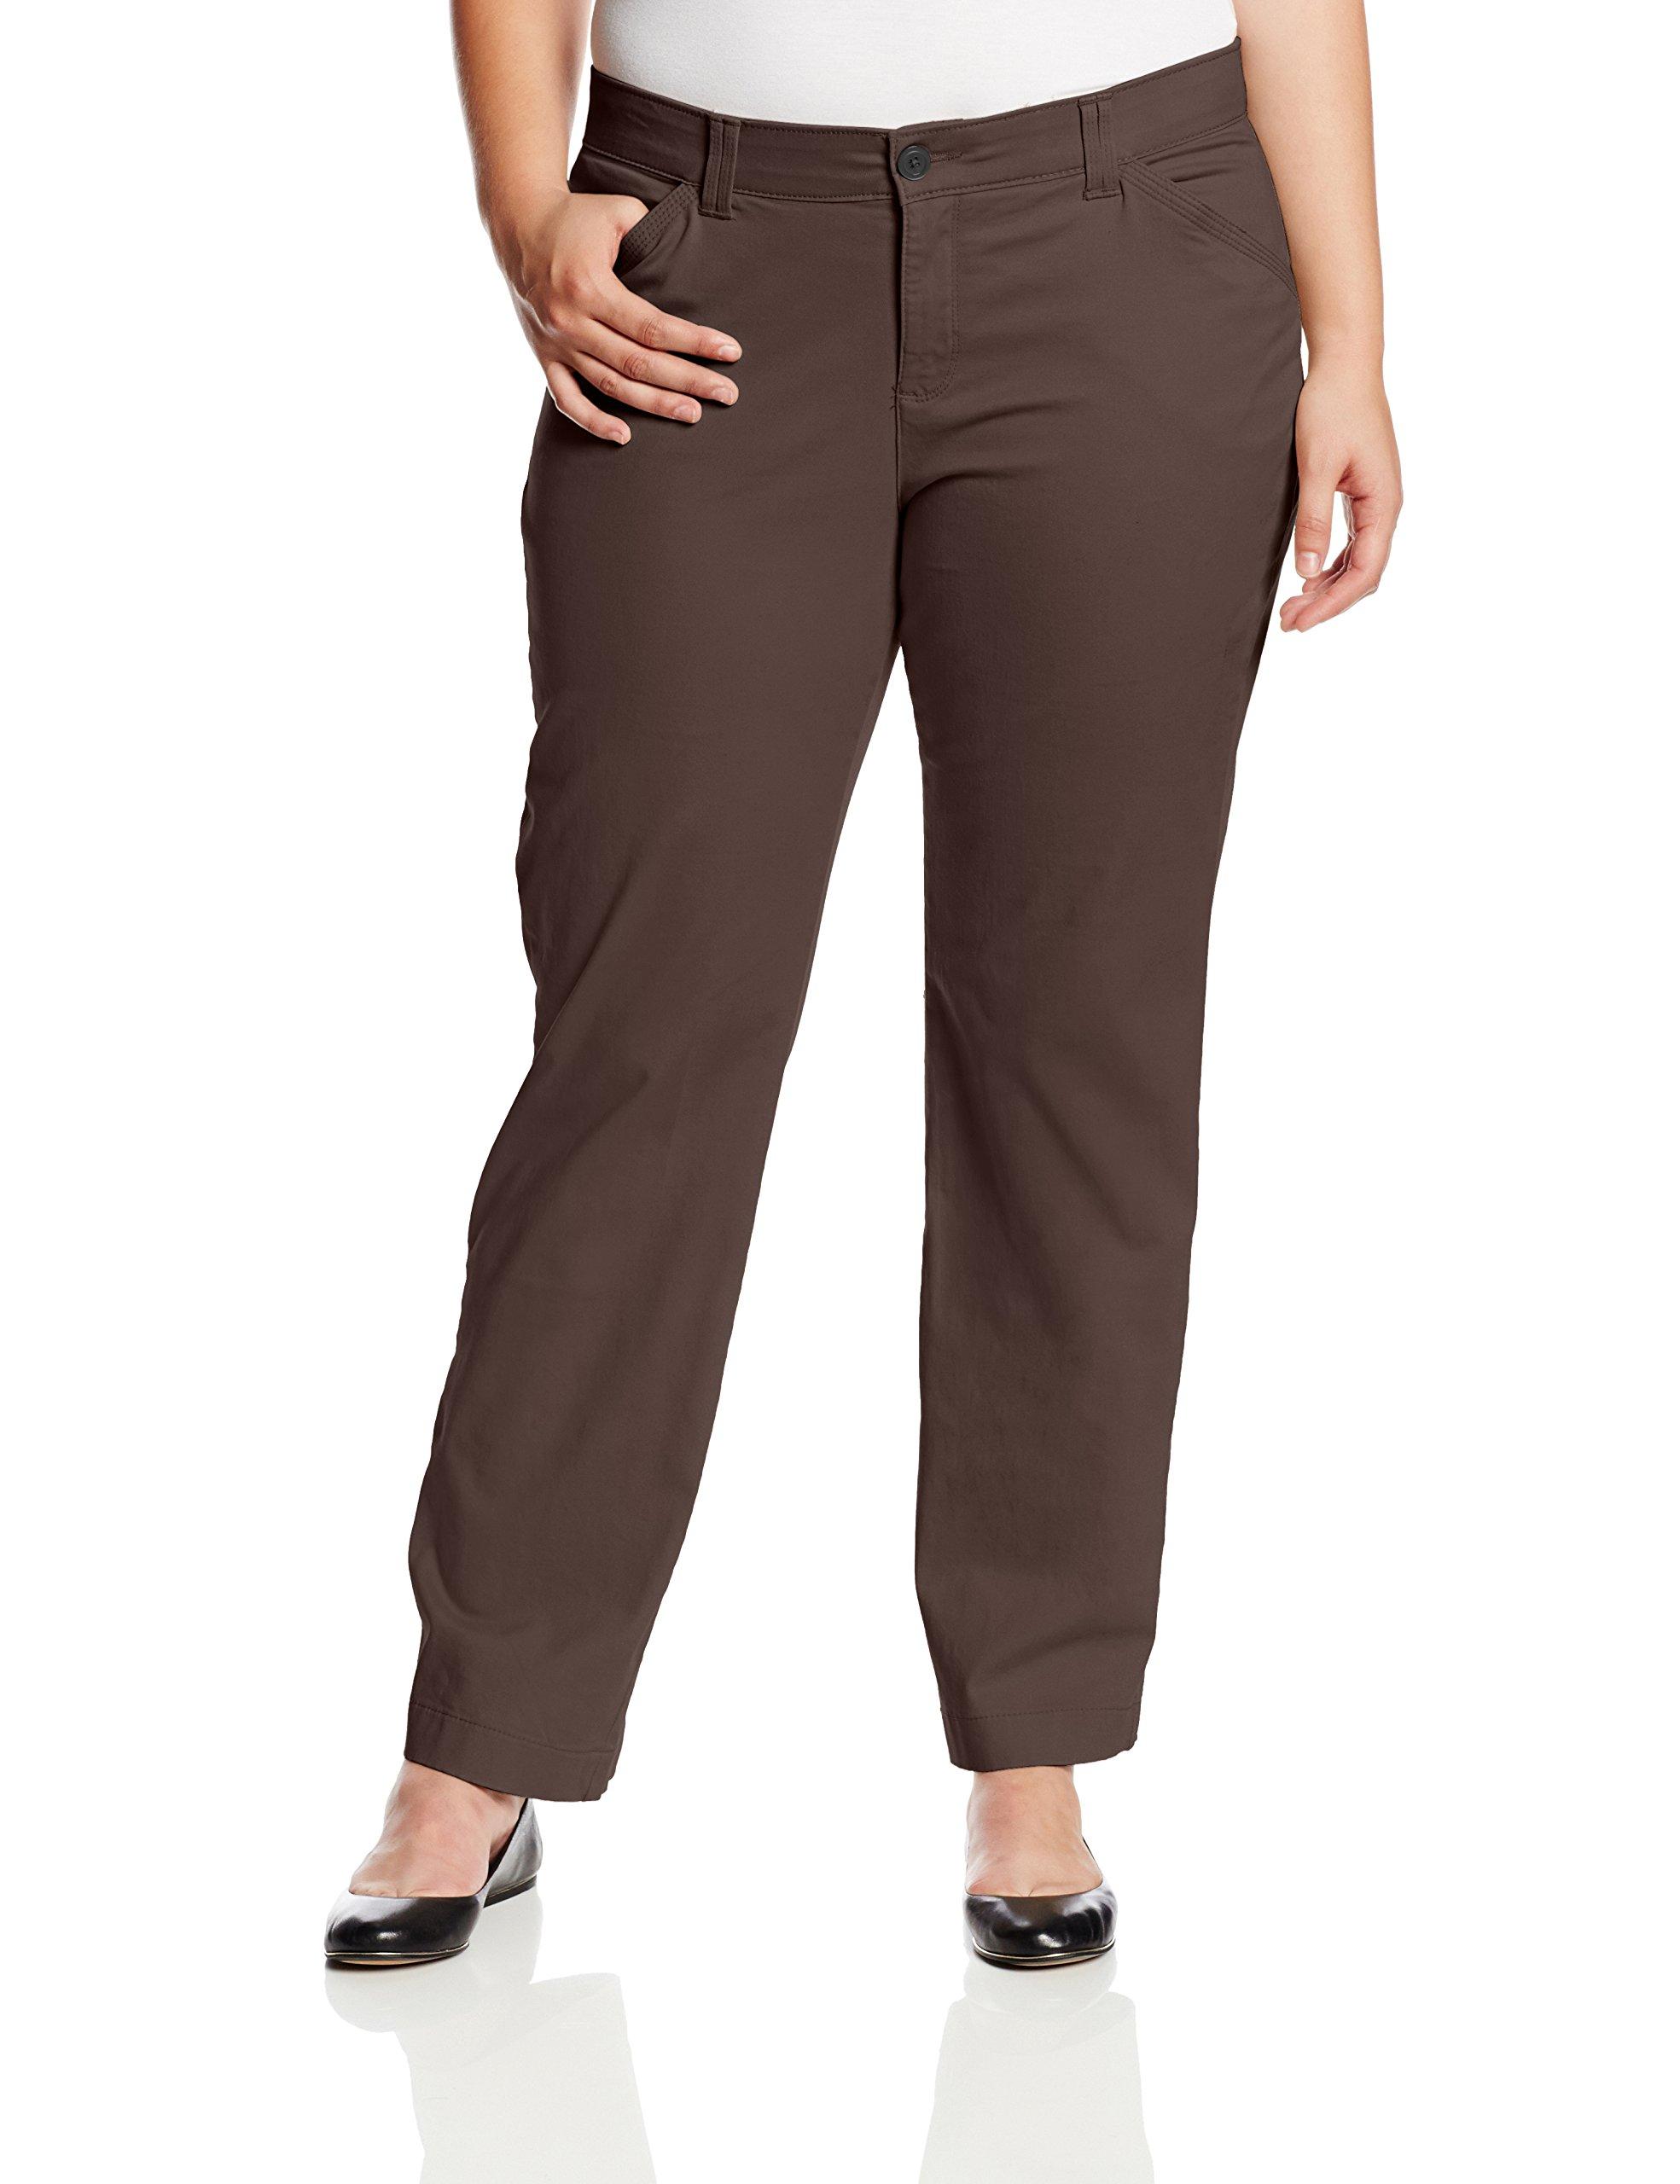 Lee Jeans Plus-size Comfort Fit Kassidy Straight Leg Pant in Coffee ...